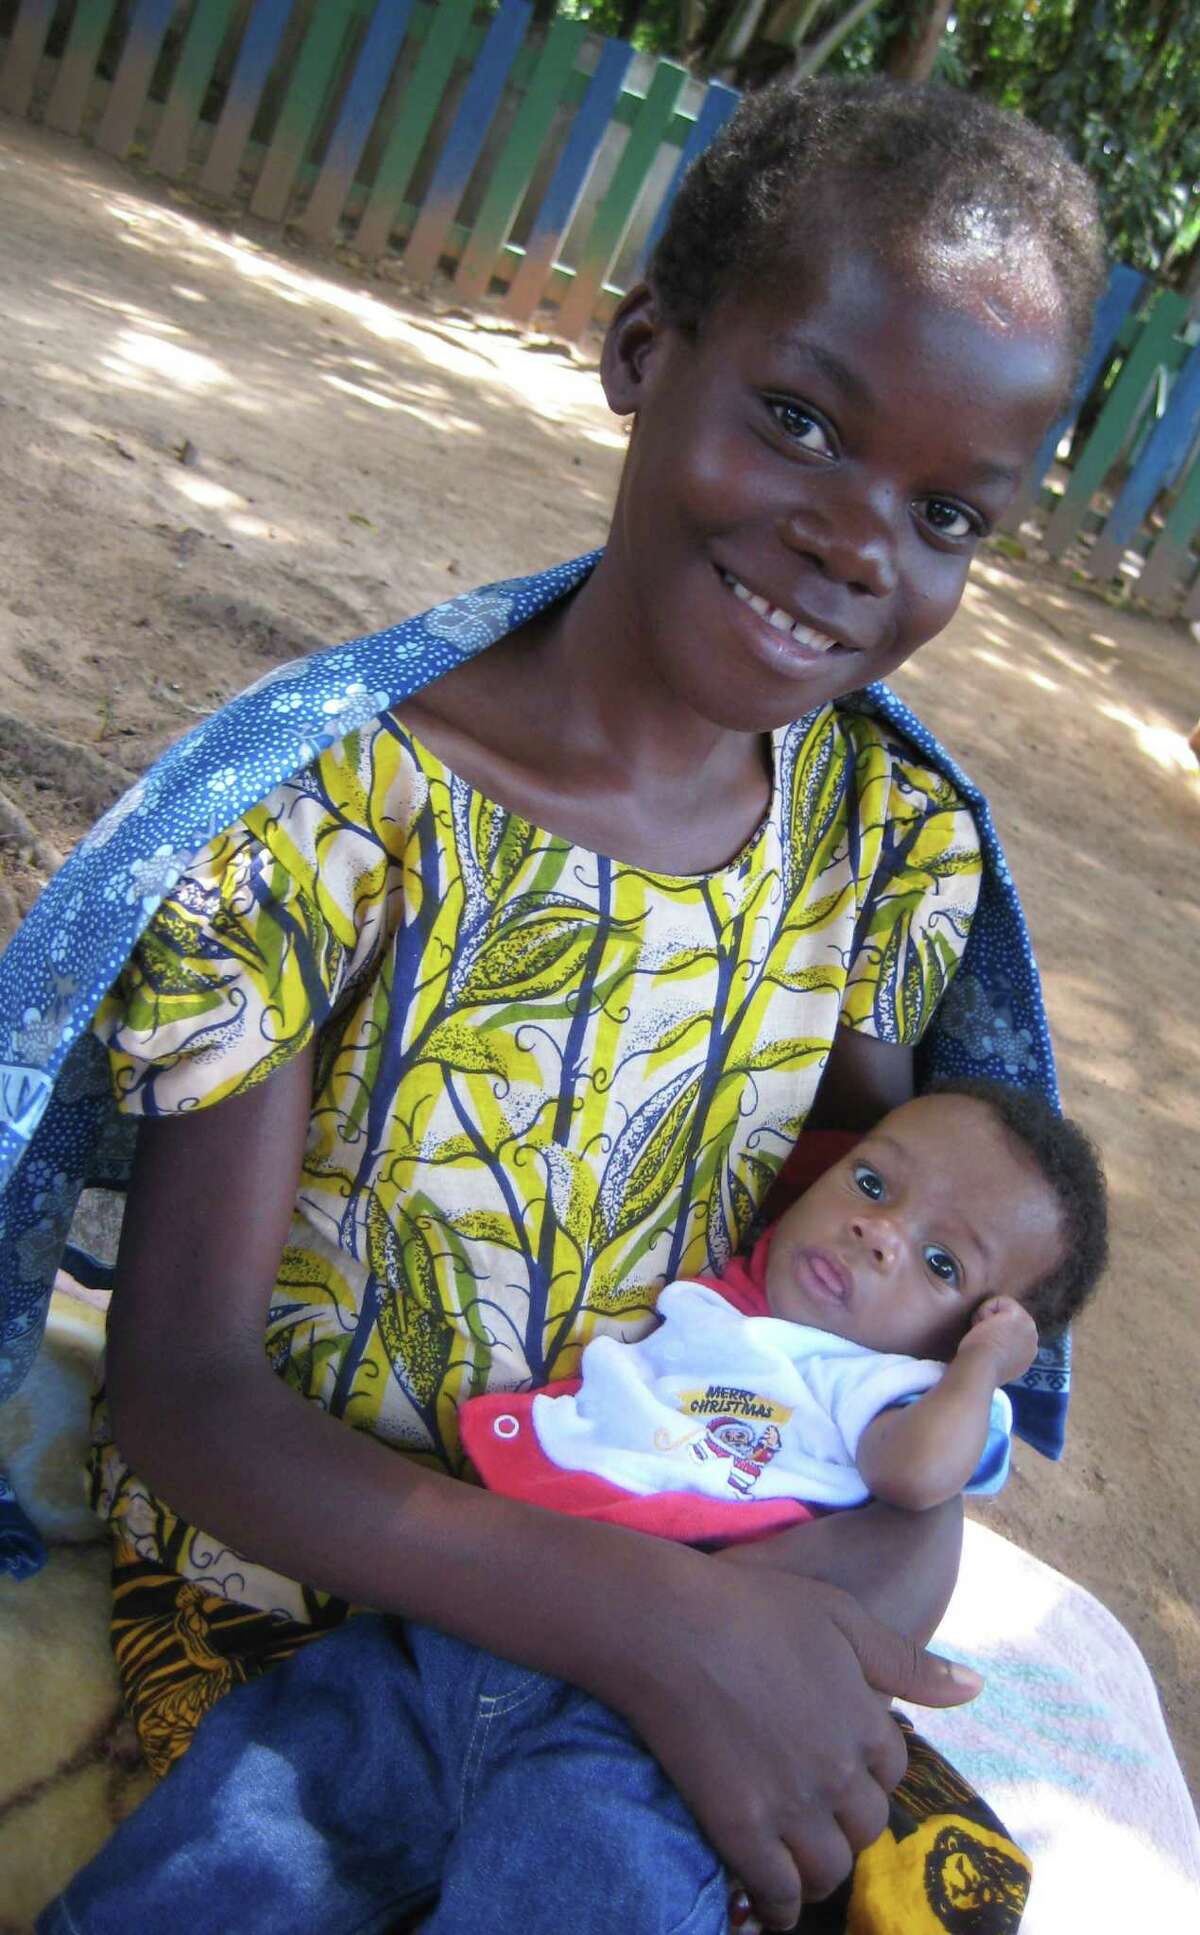 Lucia and her infant son Adamu in Mwanza, Tanzania. (Photo provided by Catholic Volunteer Network)